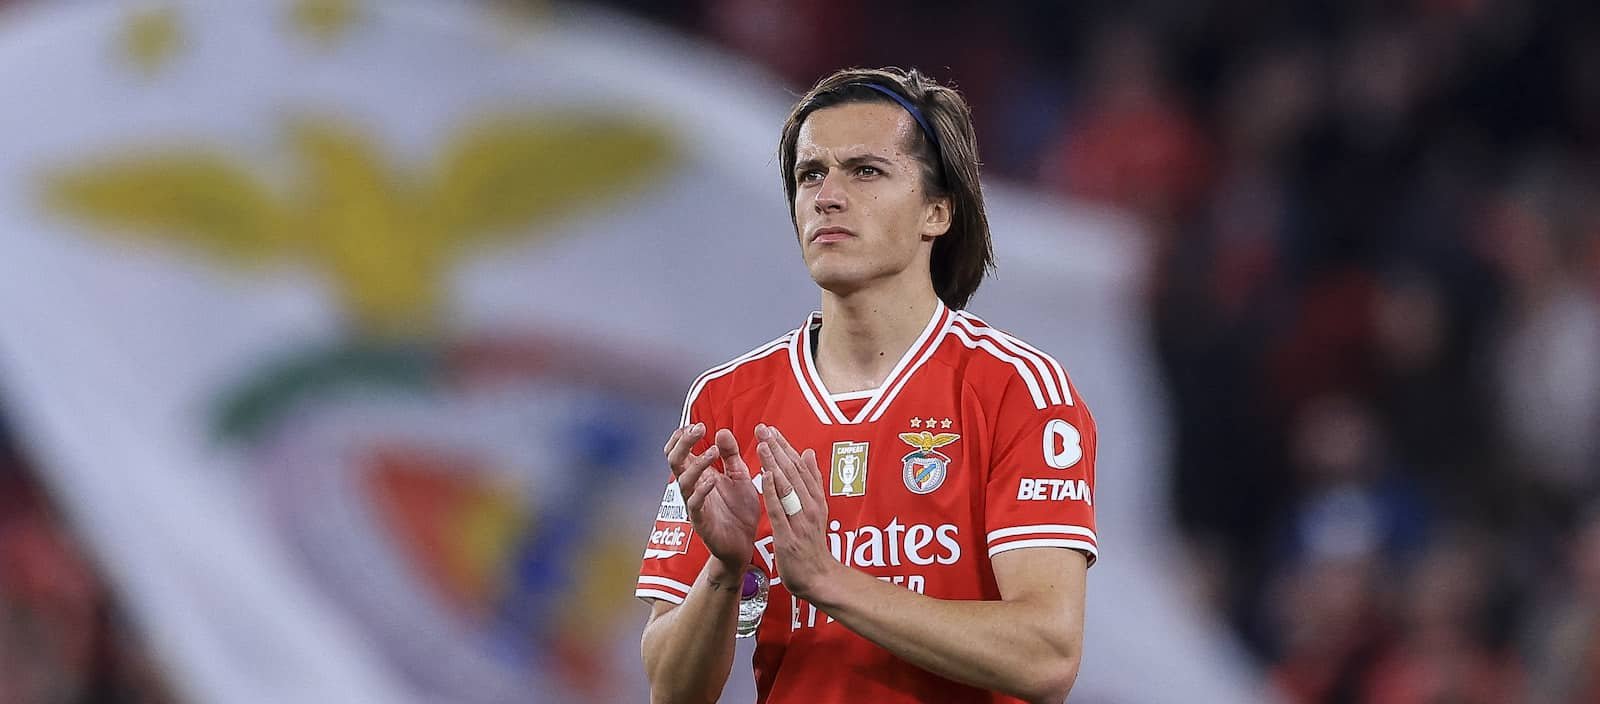 Video: Alvaro Fernandez scores first Benfica goal in stunning display for Benfica vs. Farense - Man United News And Transfer News